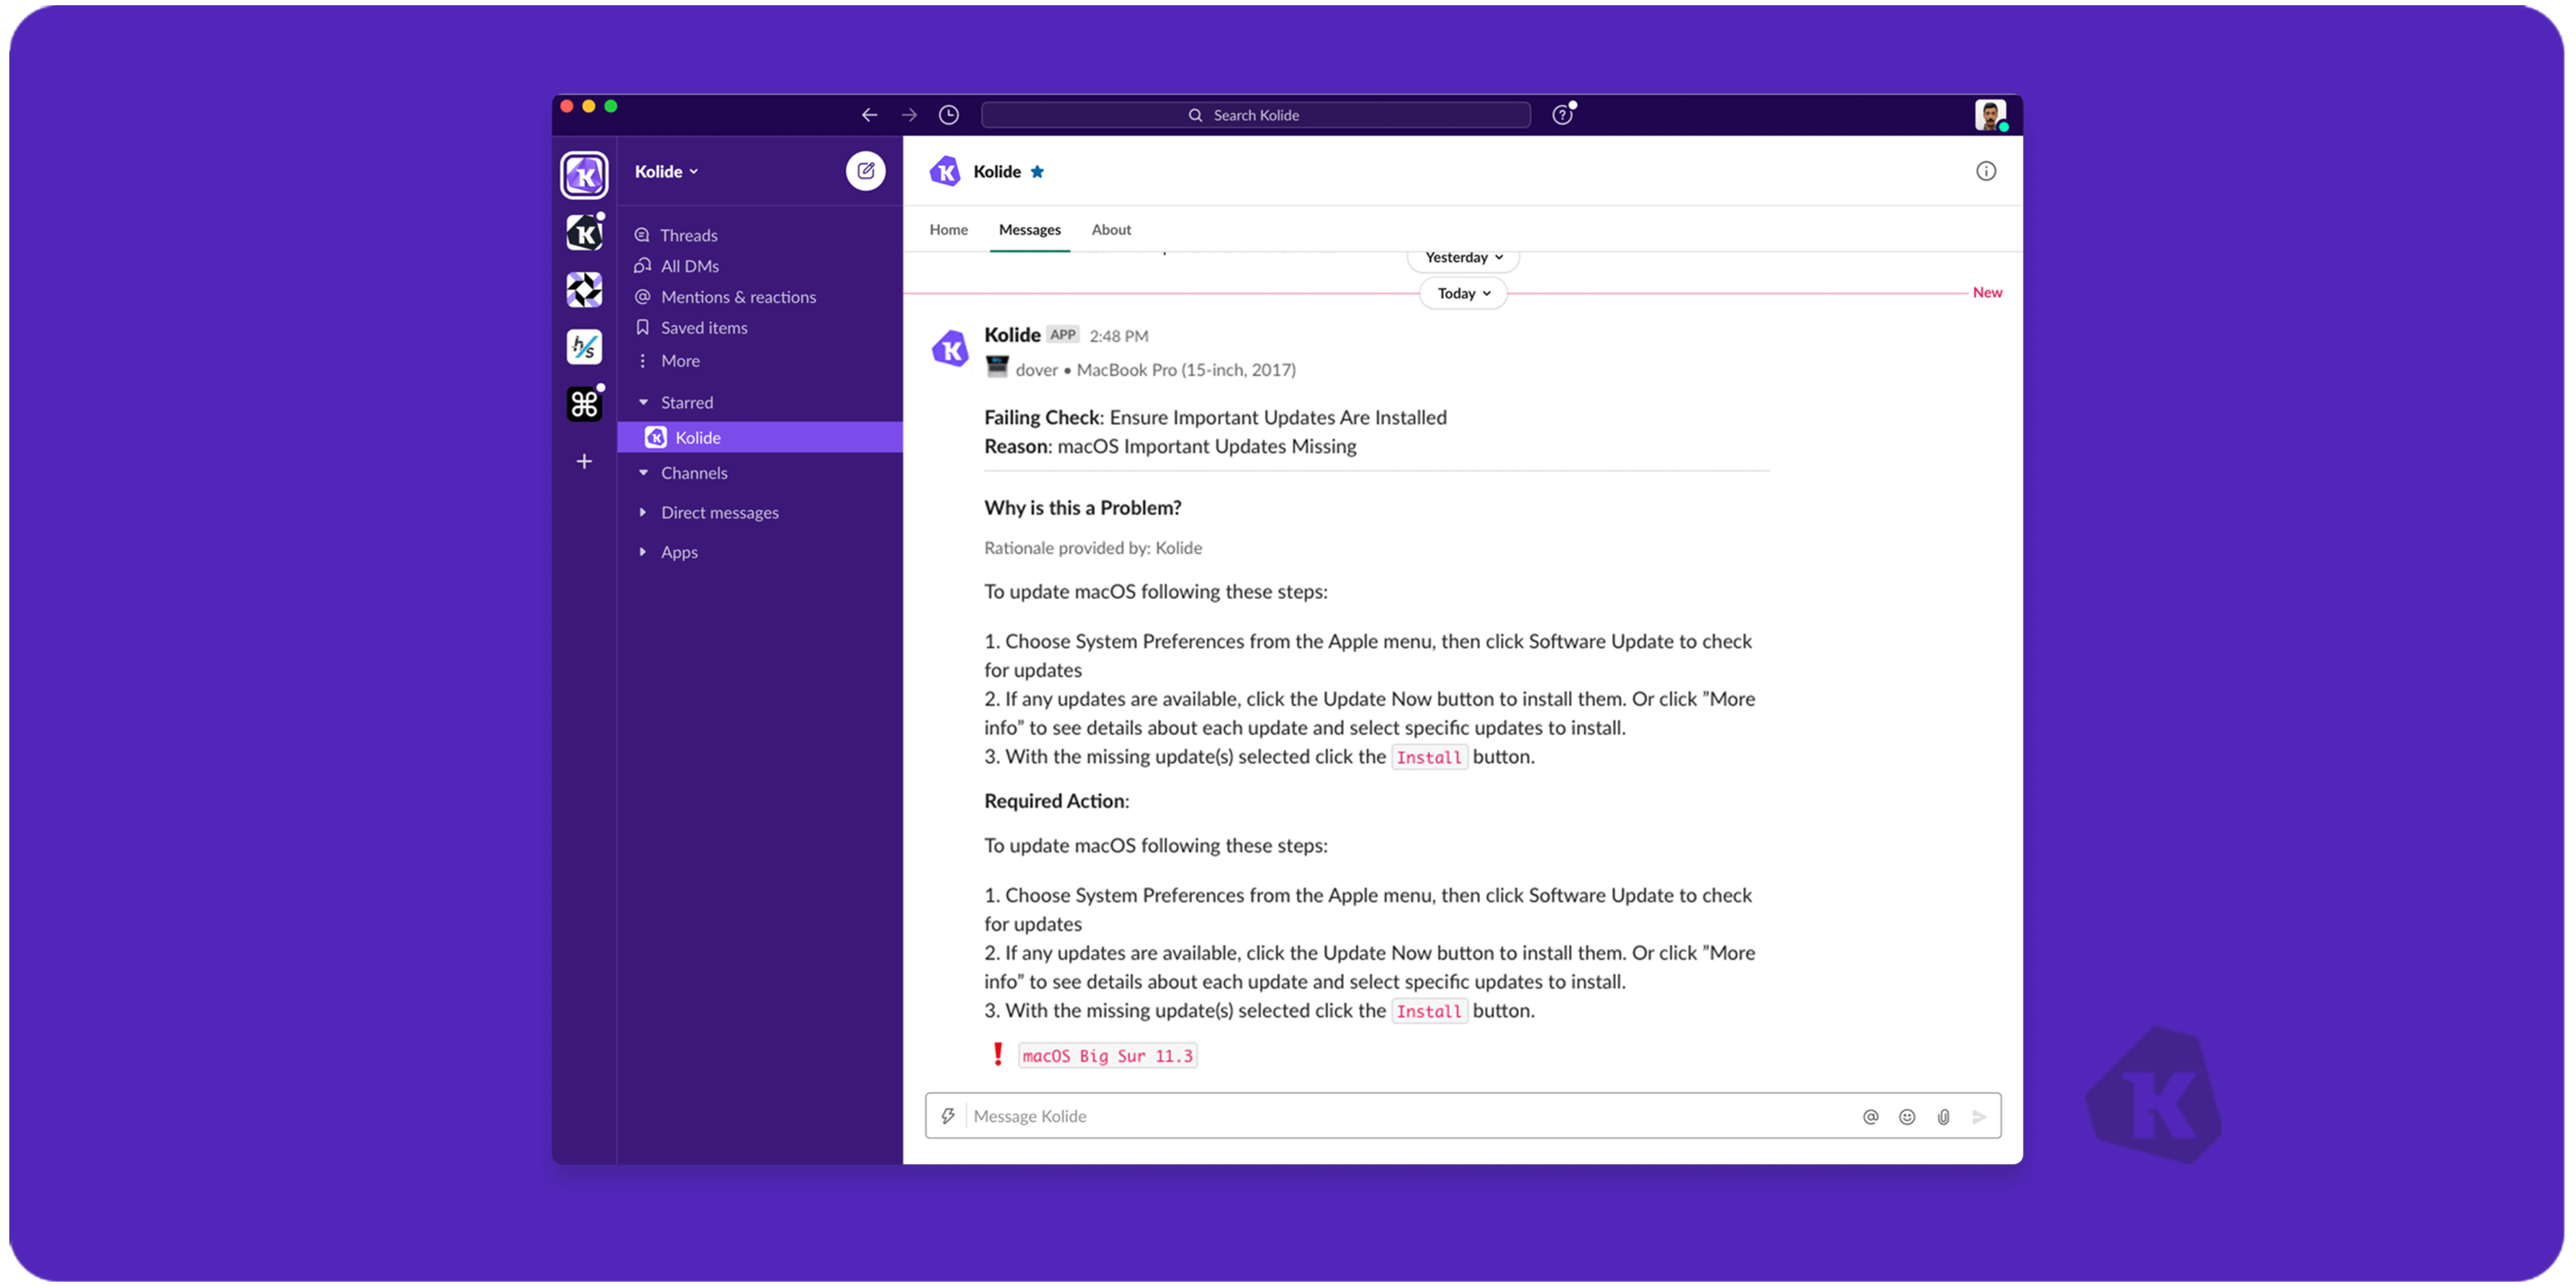 A screenshot of Kolide's Slack App displaying an issue notification for missing important updates.